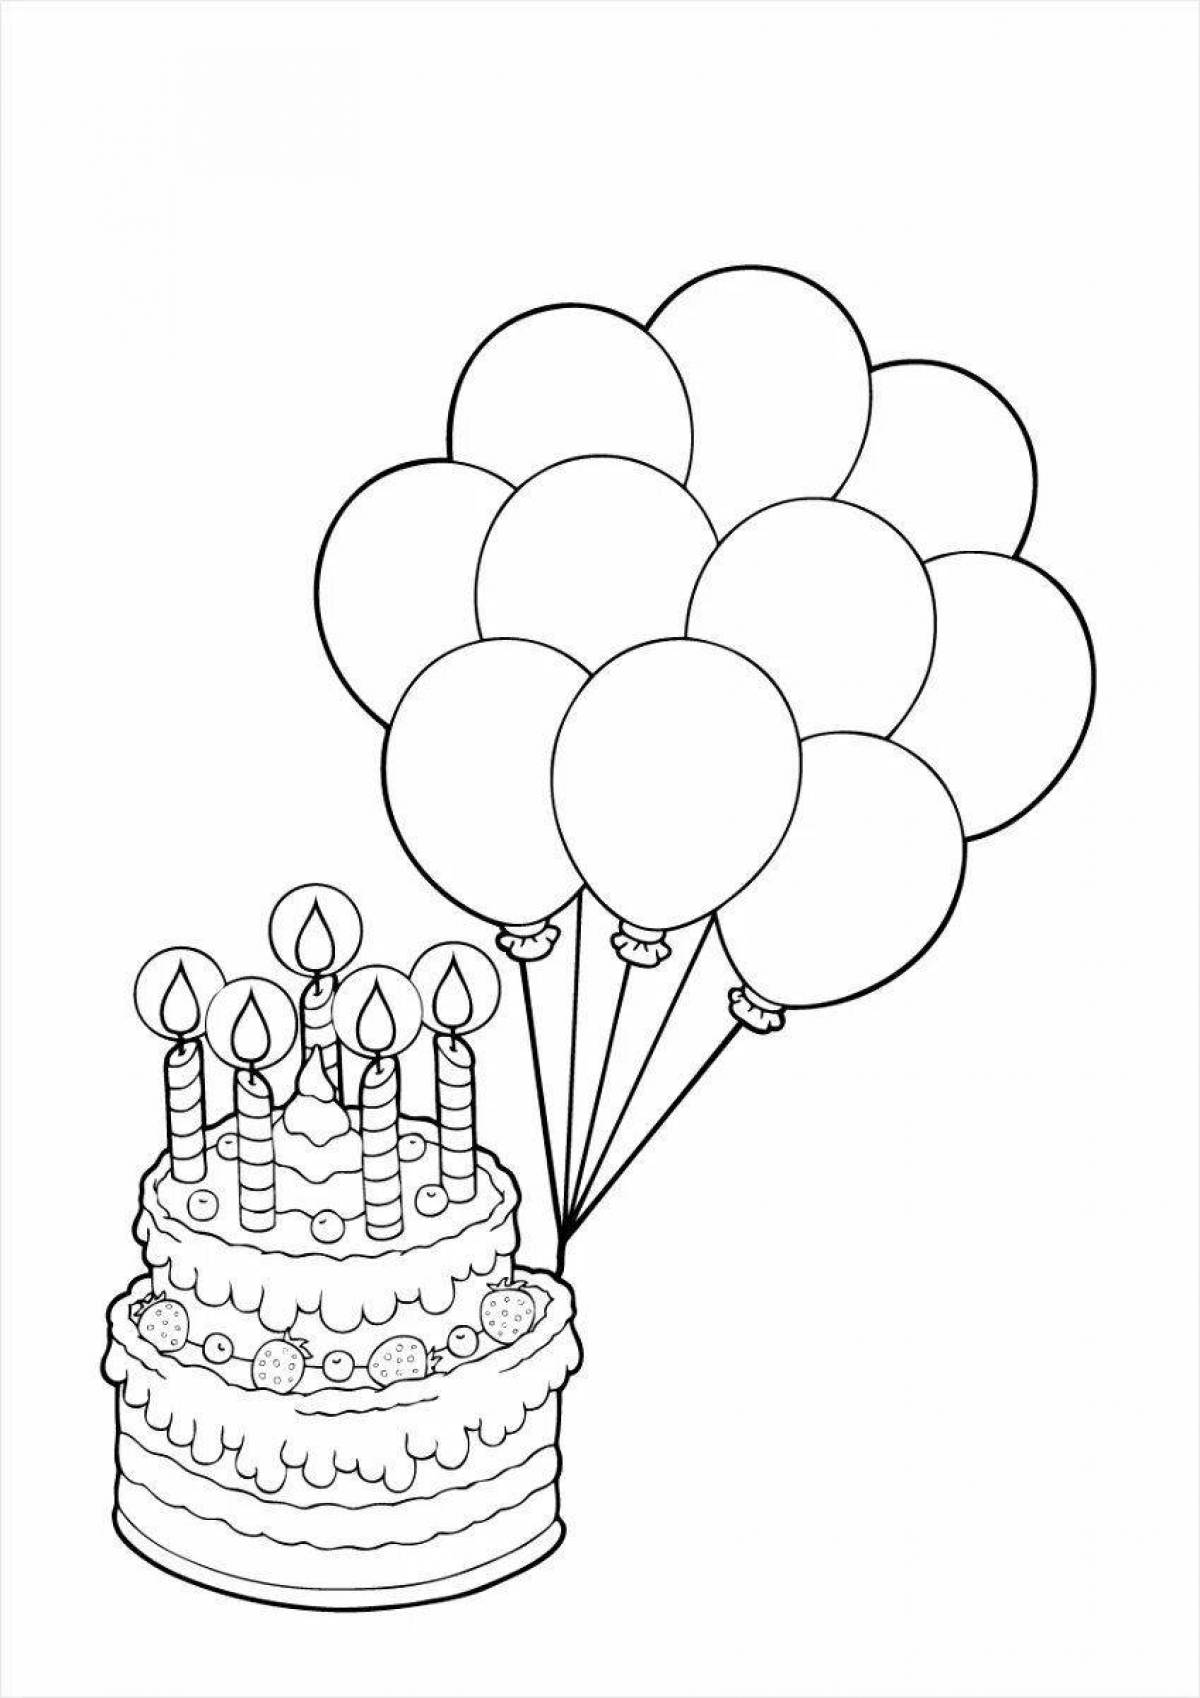 Playful happy birthday balloon coloring page